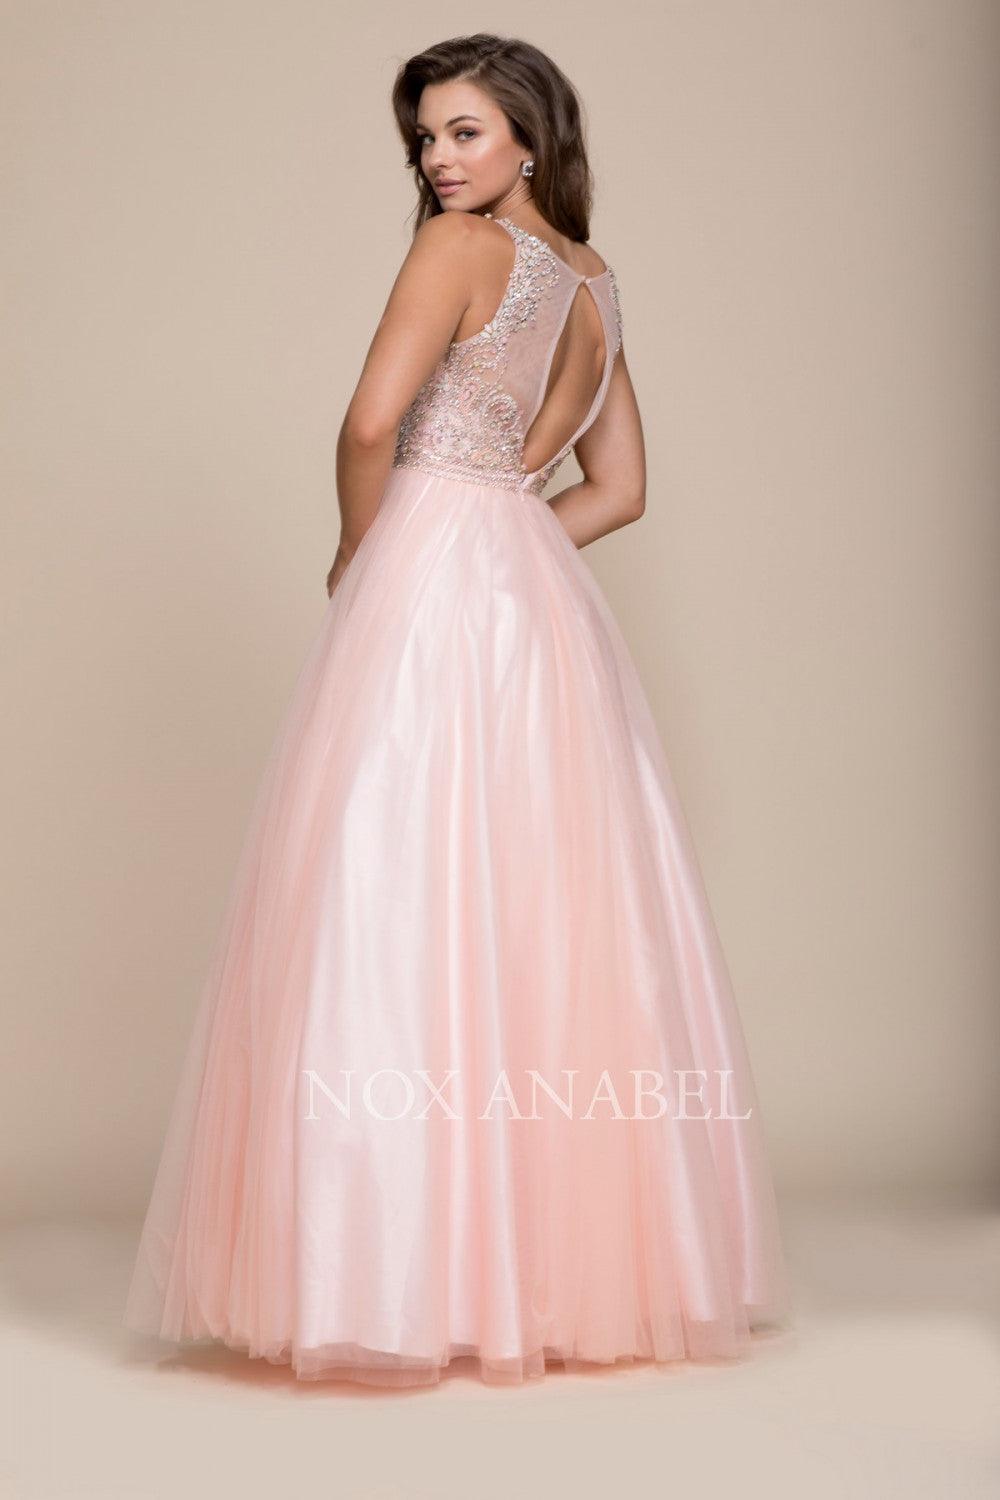 Long Evening Dress Formal Prom Gown Bashful Pink - The Dress Outlet Nox Anabel